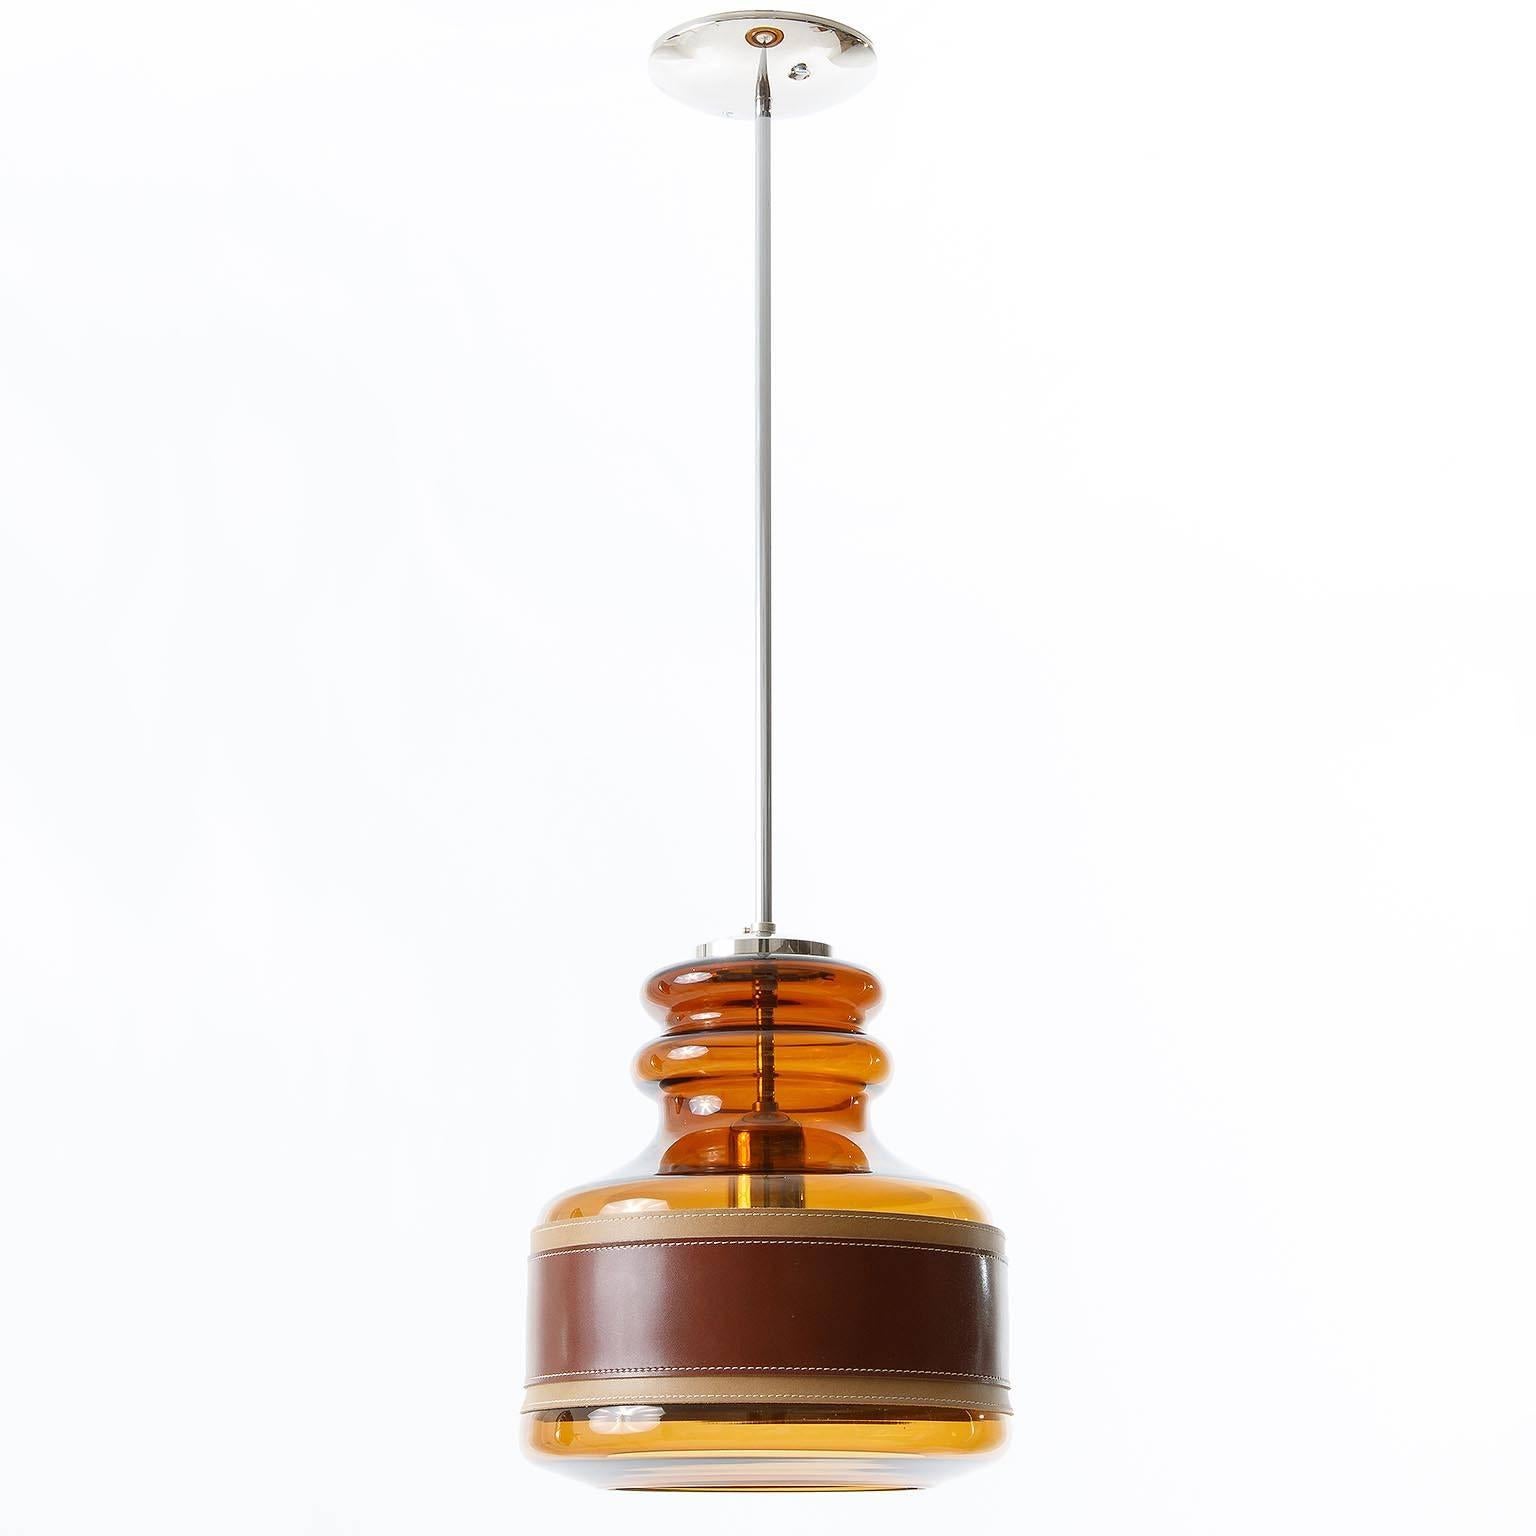 A beautiful and very rare glass pendant light or chandelier by Kalmar, manufactured in Mid-Century, circa 1970 (late 1960s or early 1970s). It is made of a chromed hardware and an amber toned glass body with a belt made of two layers of brown